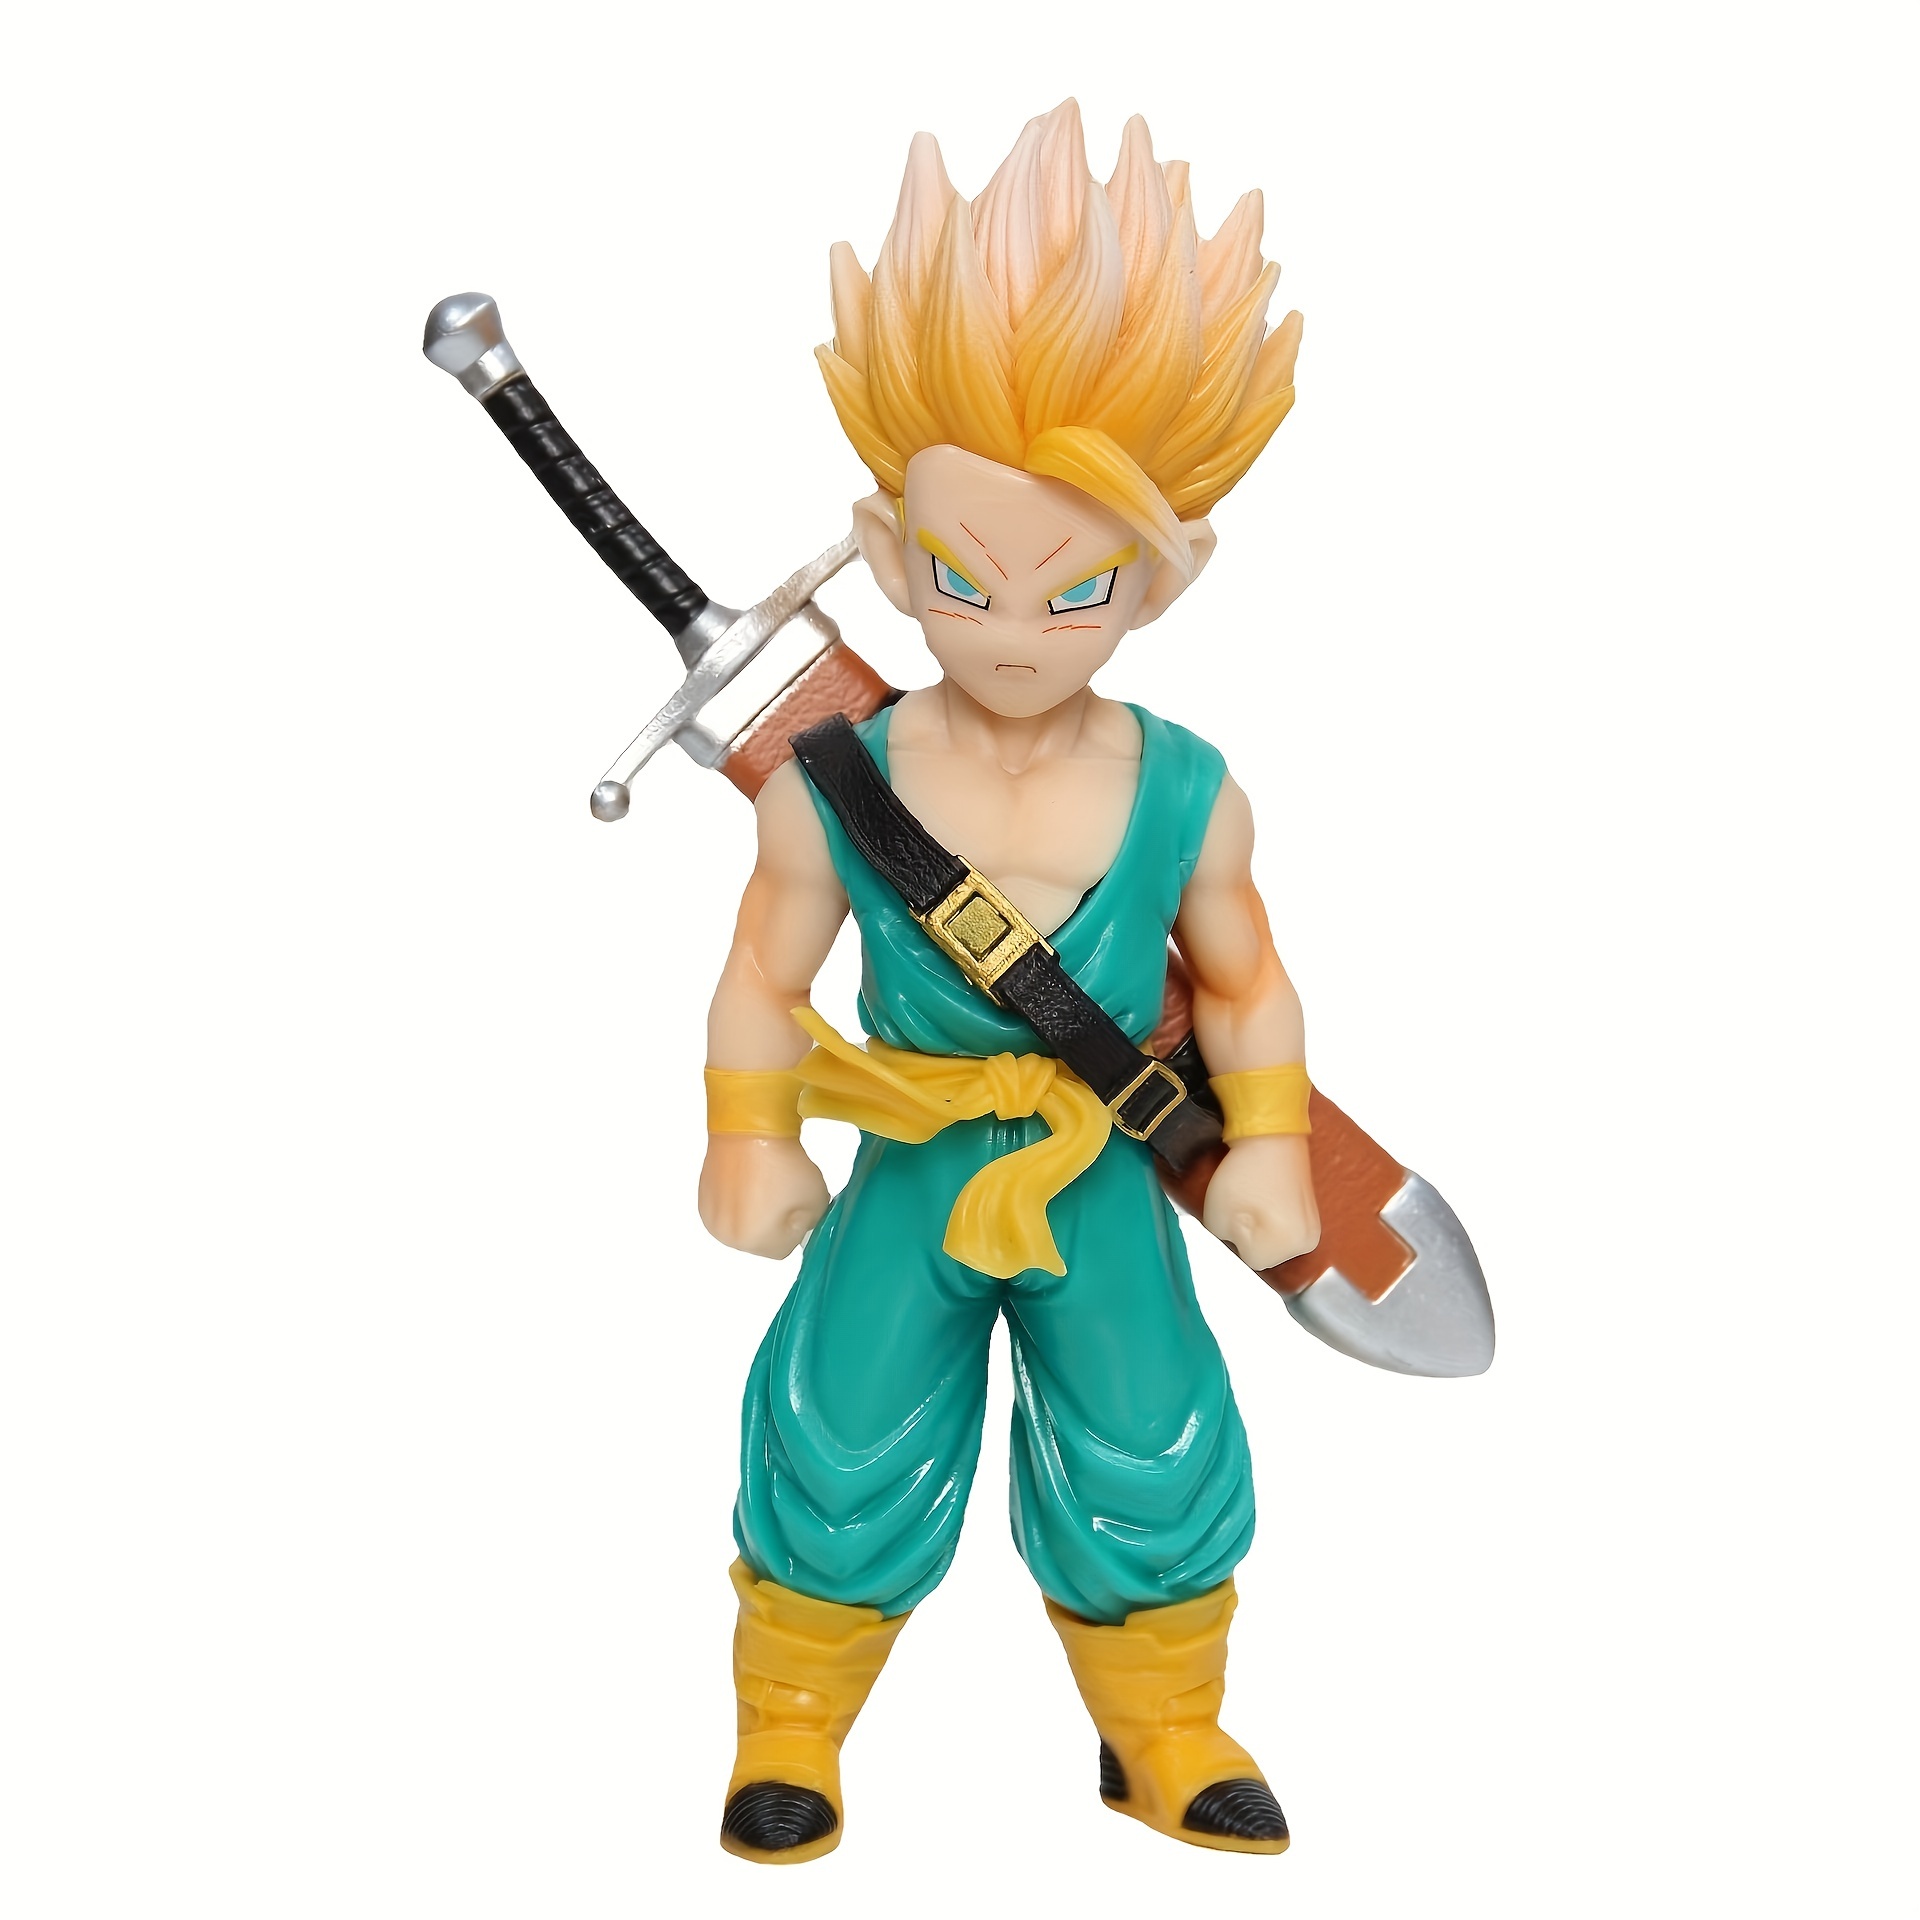 1310 Anime Figure Action Figure - Perfect Gift For Anime-Loving Boys!